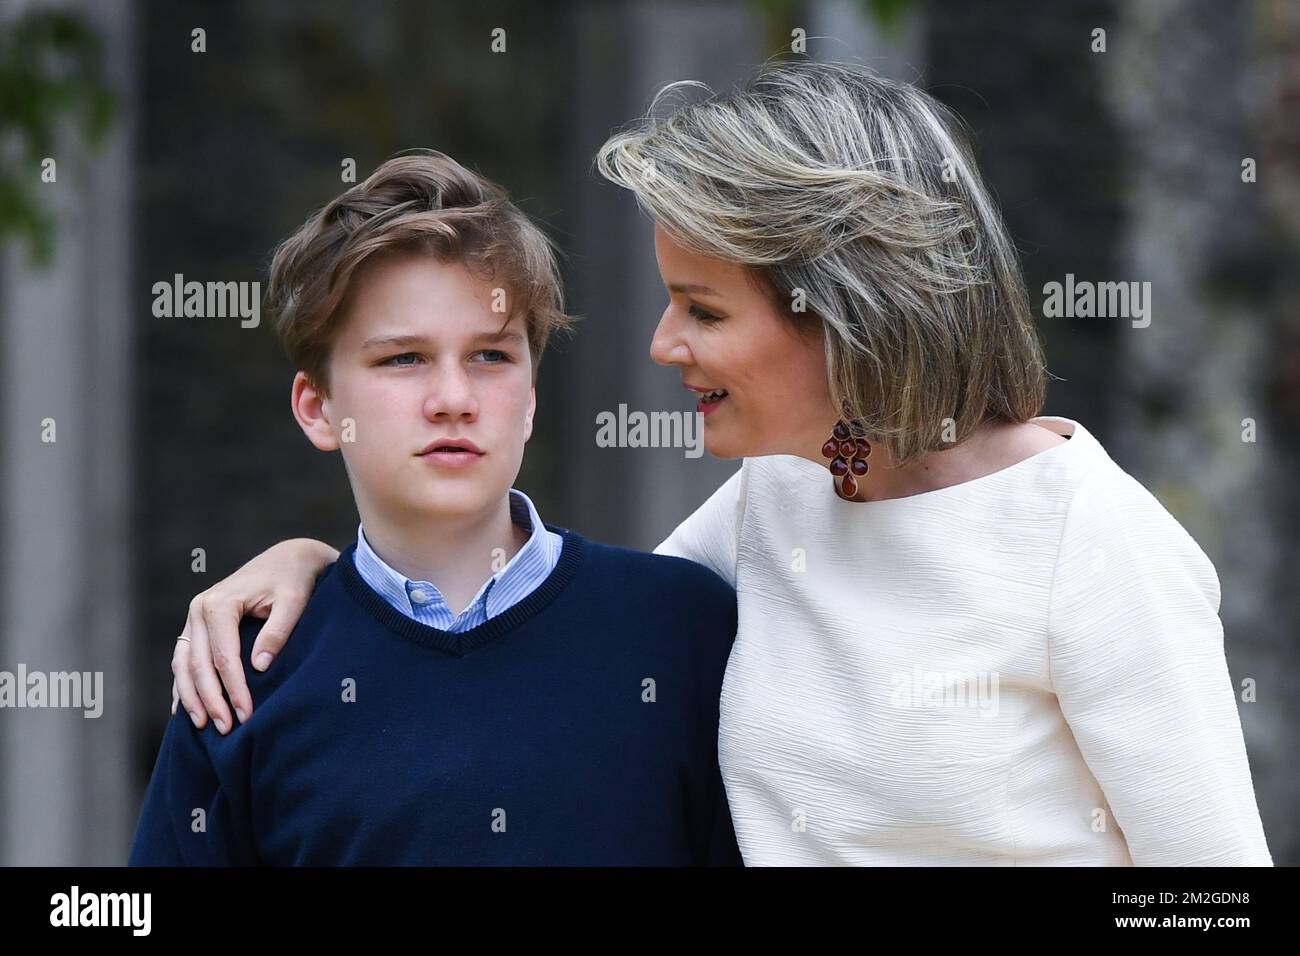 Prince Gabriel and Queen Mathilde of Belgium pictured during a photoshoot of the Belgian Royal Family's vacation at the Villers Abbey in Villers-la-Ville, Sunday 24 June 2018. BELGA PHOTO POOL FREDERIC SIERAKOWSKI  Stock Photo